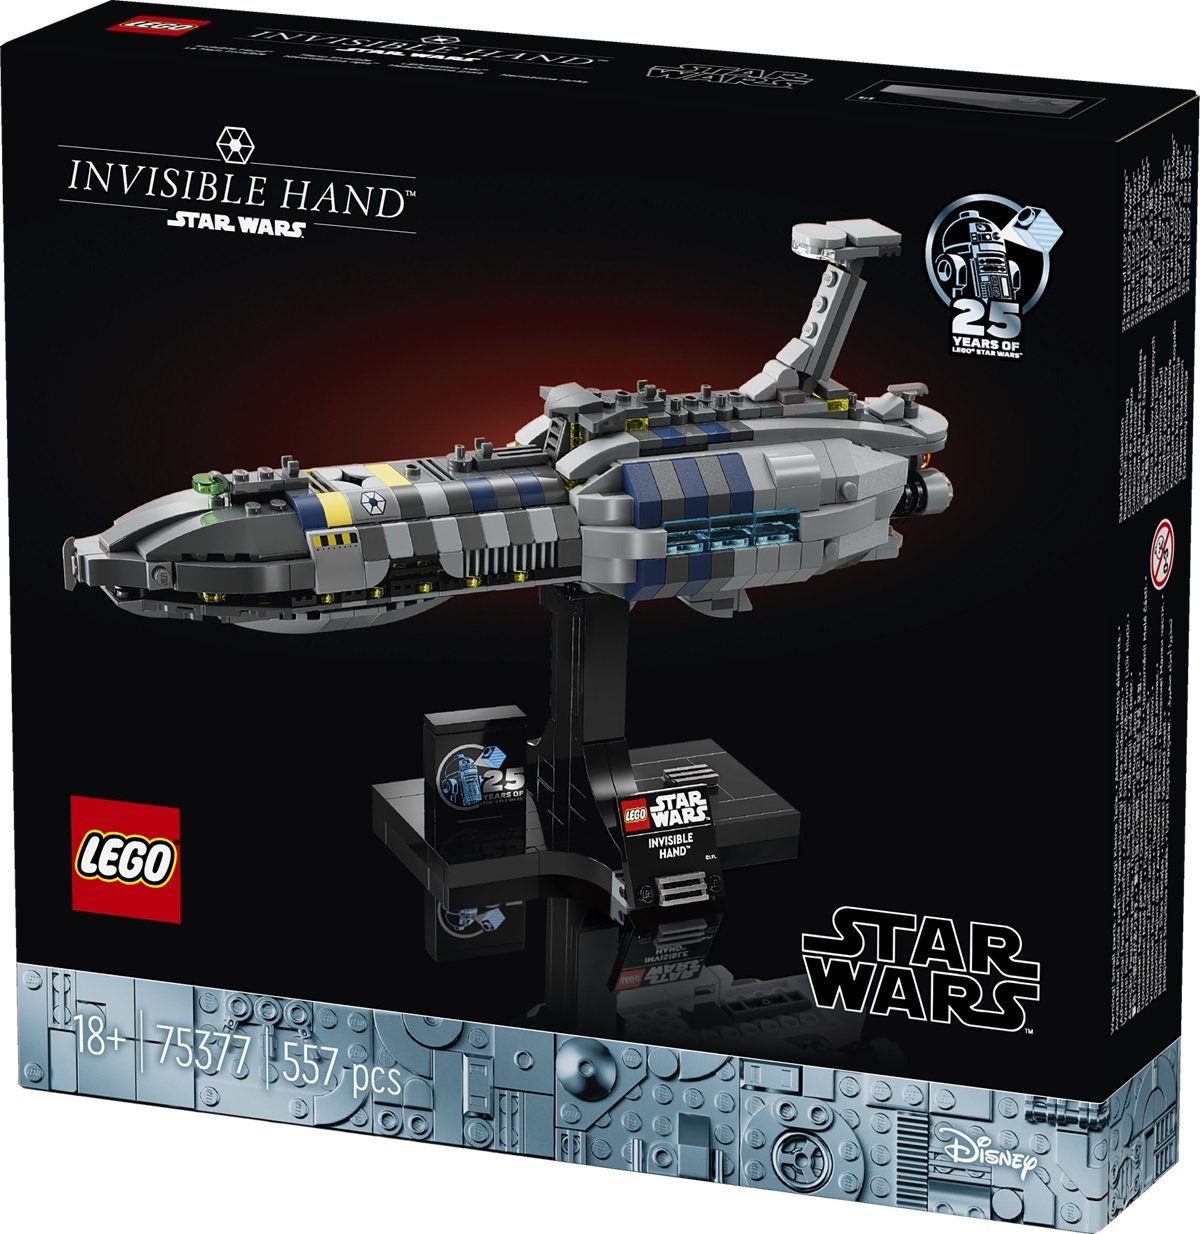 LEGO Star Wars Invisible Hand starship packaging.